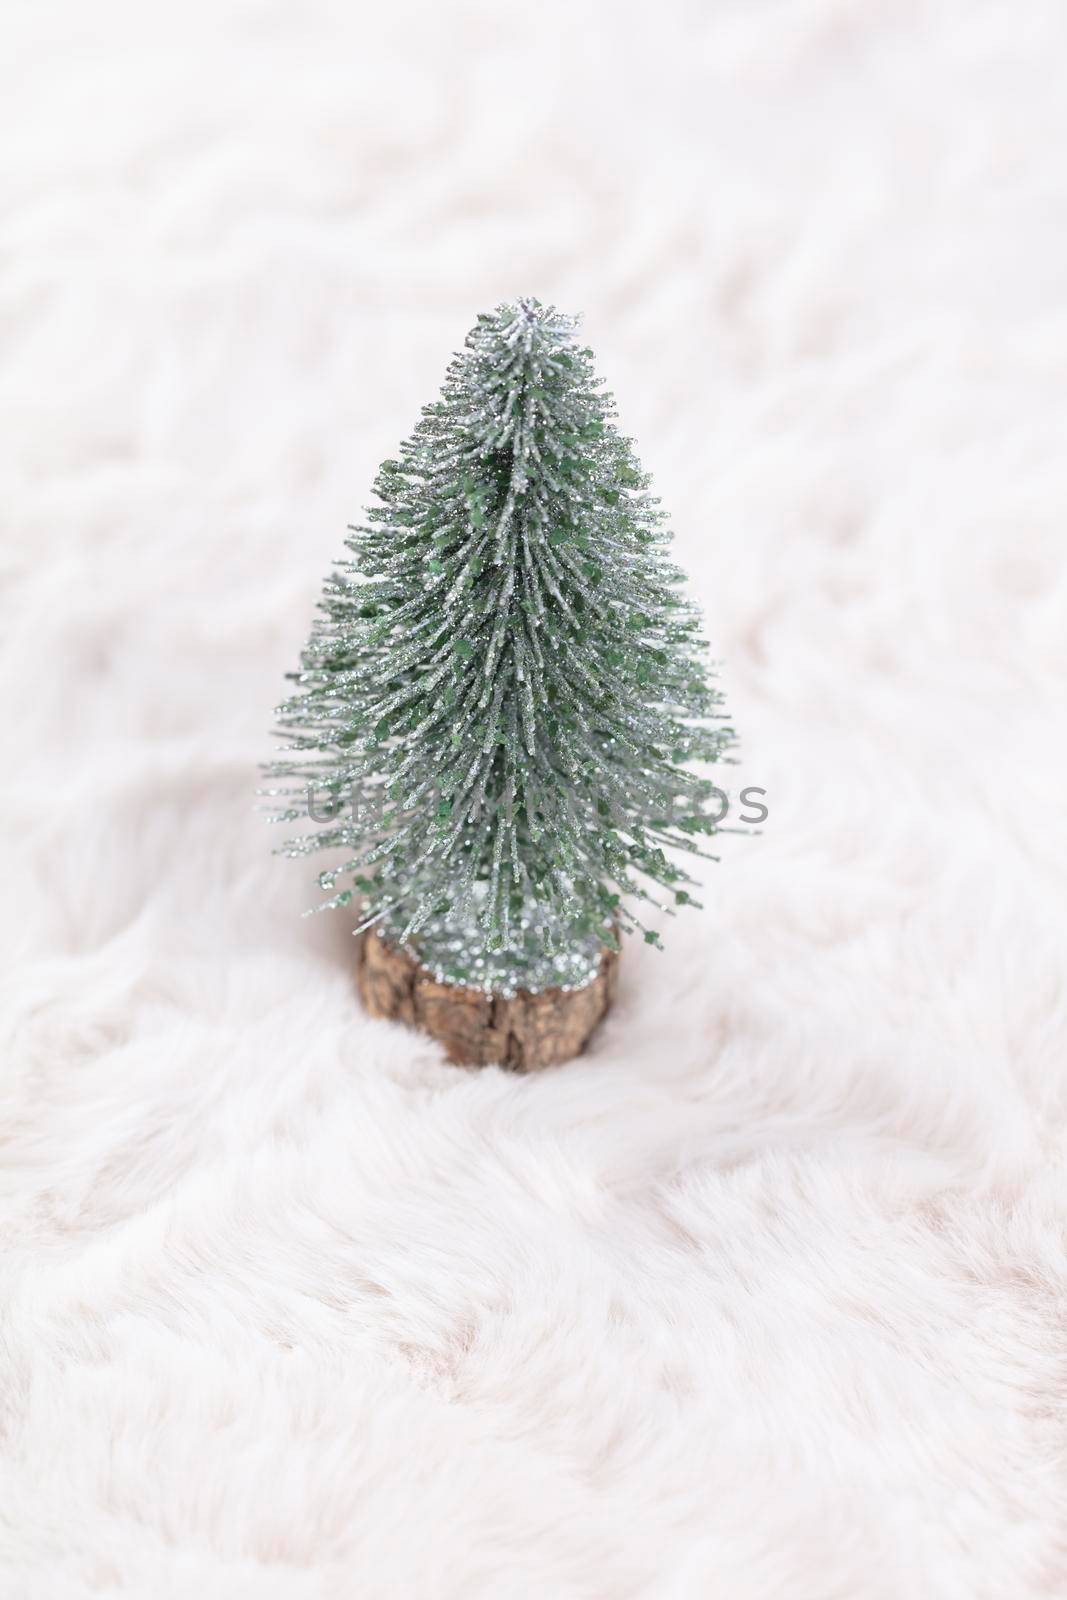 Christmas little trees and wool background.